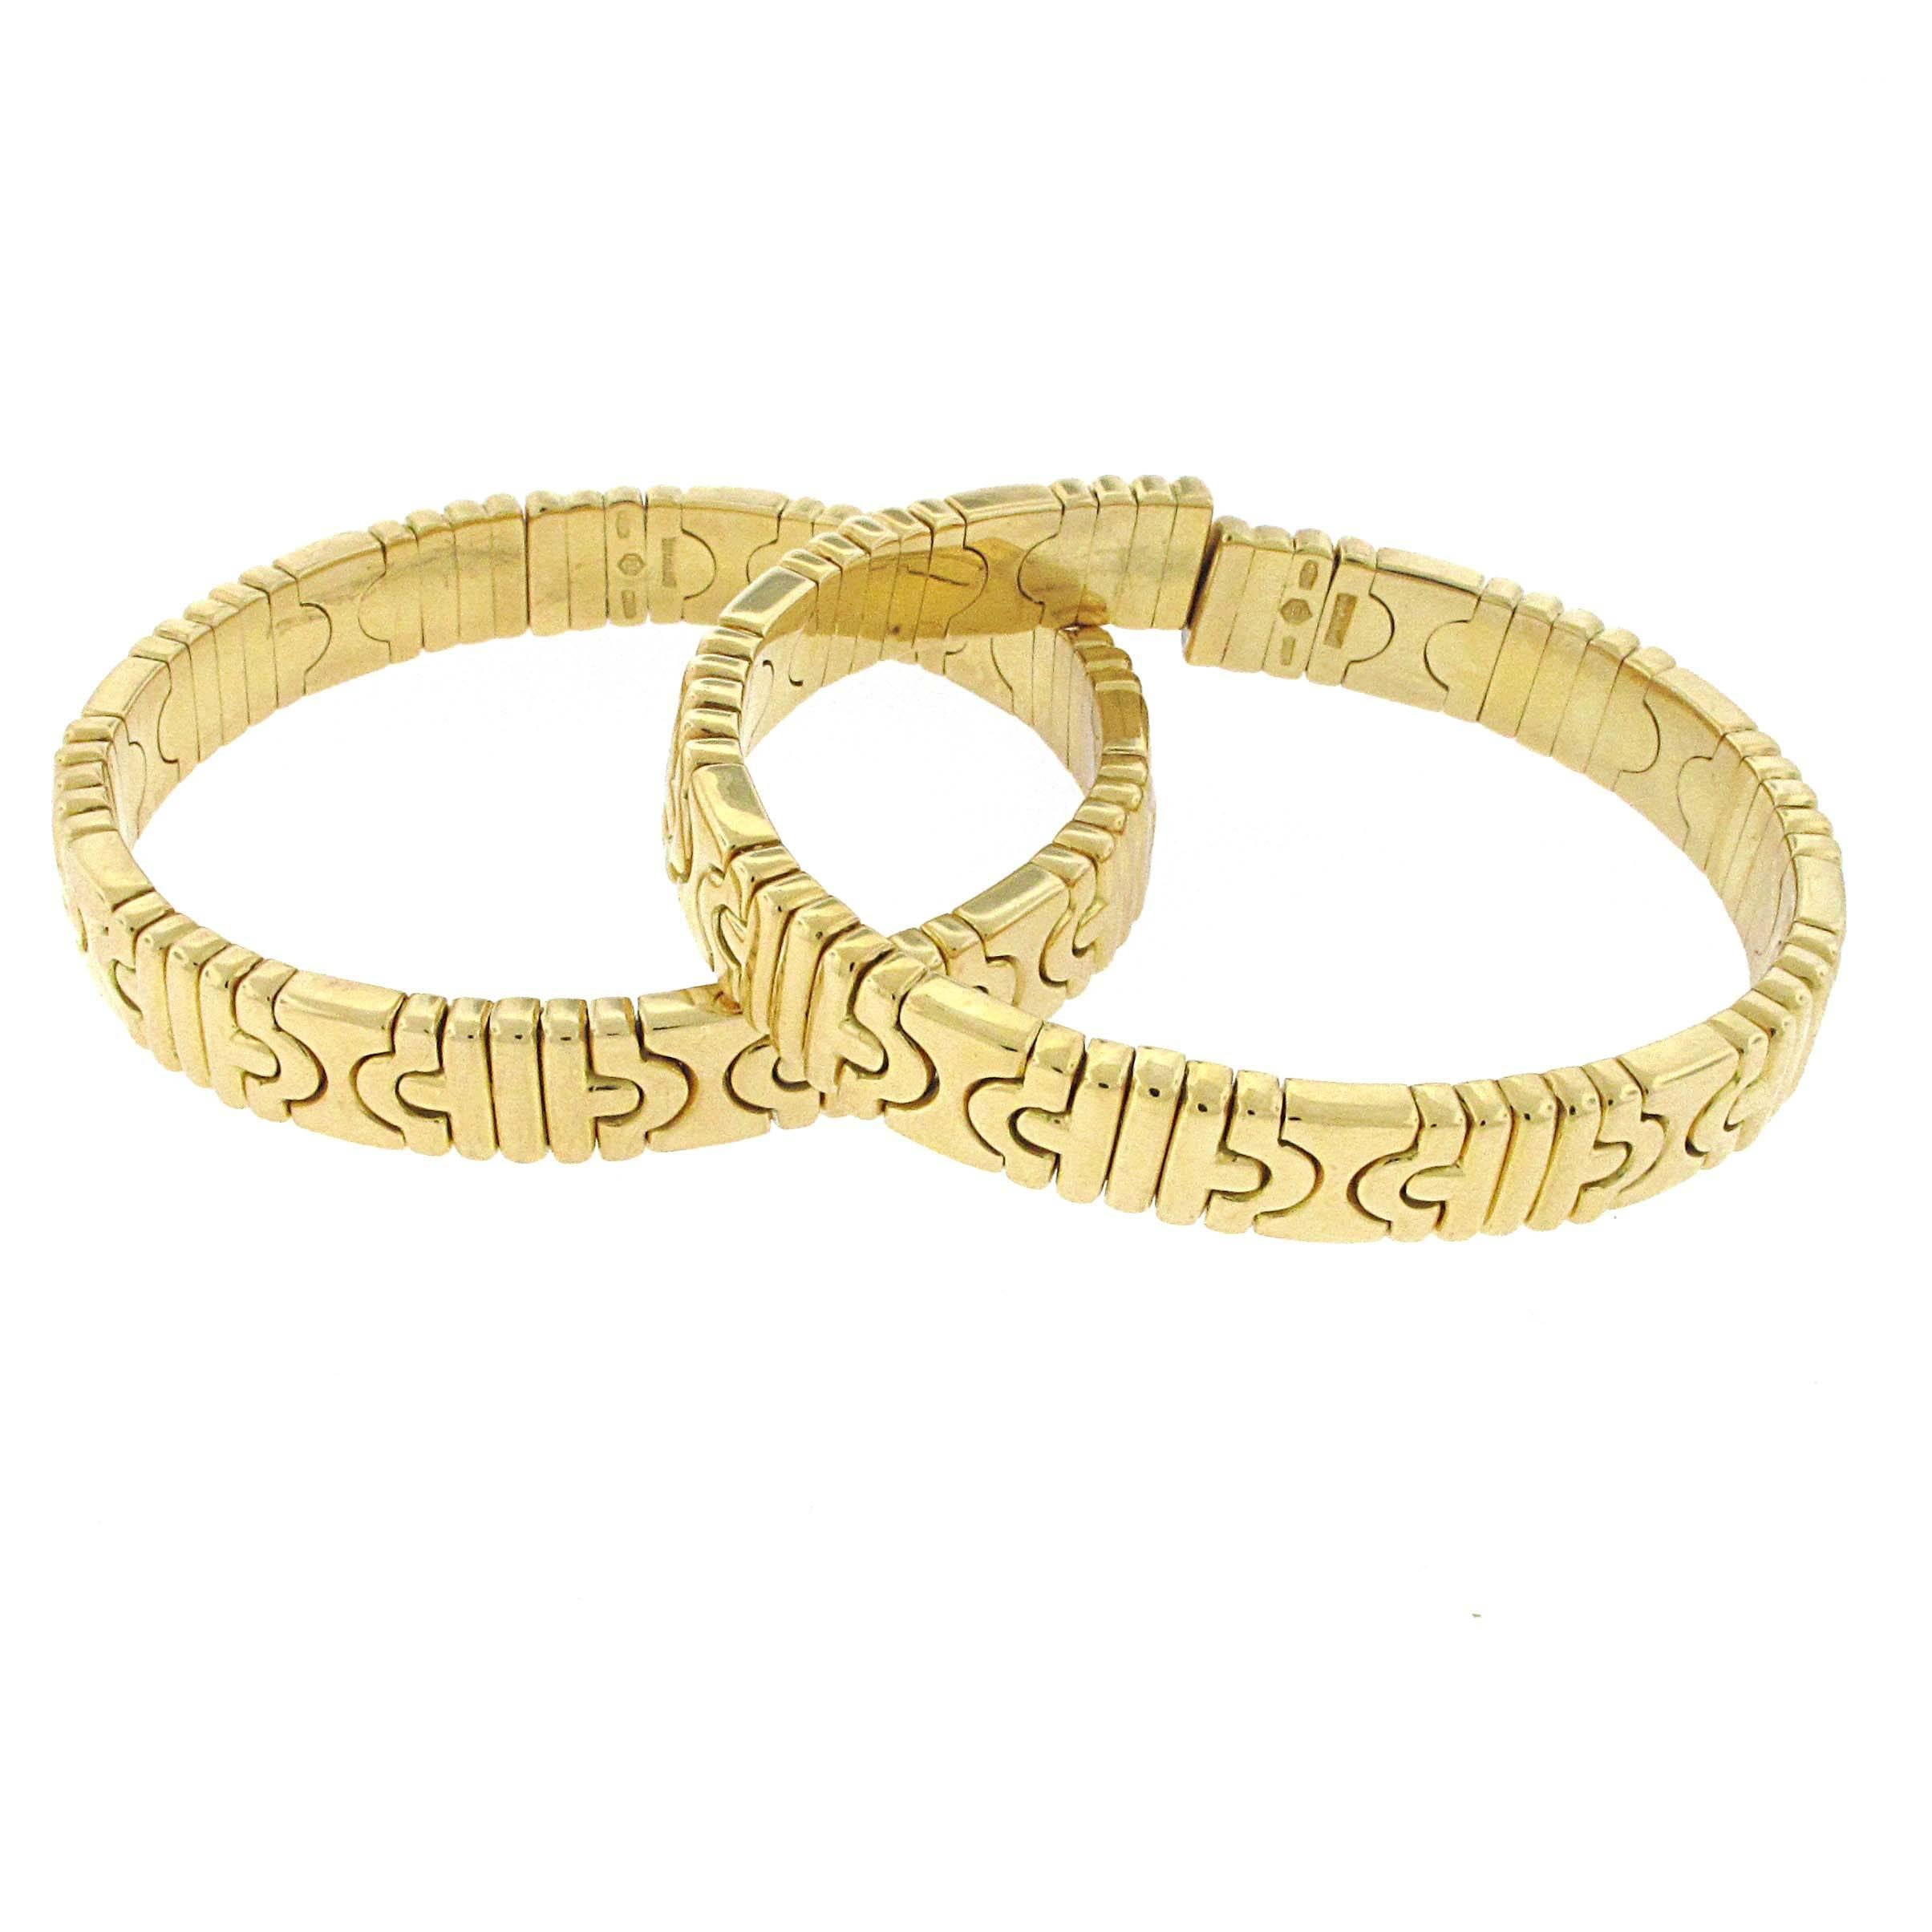 The most iconic design Bulgari has to date. The Parentesi collection shows how timeless Bulgari's designs can be. This pair of bangles can be had for less than the price of one bangle at Bulgari. The all yellow gold bangles are the most sought after